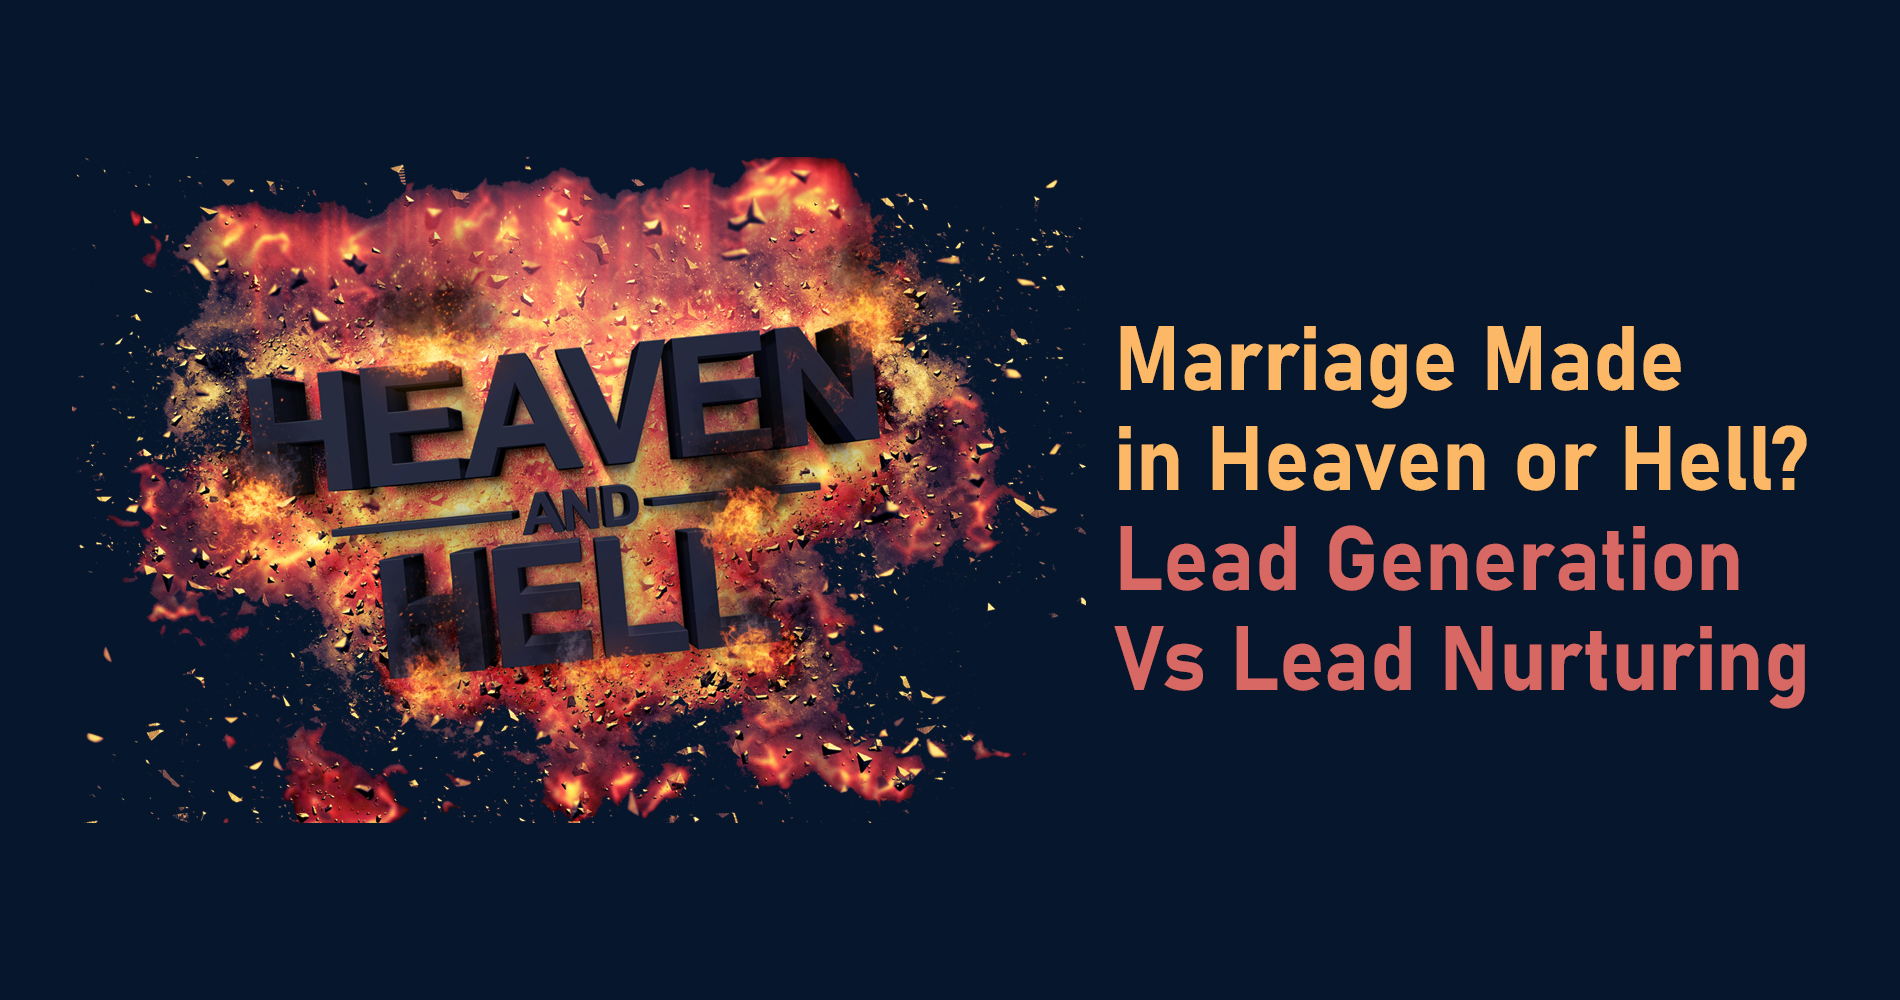 Marriage Made in Heaven or Hell - Lead Generation Vs Lead Nurturing